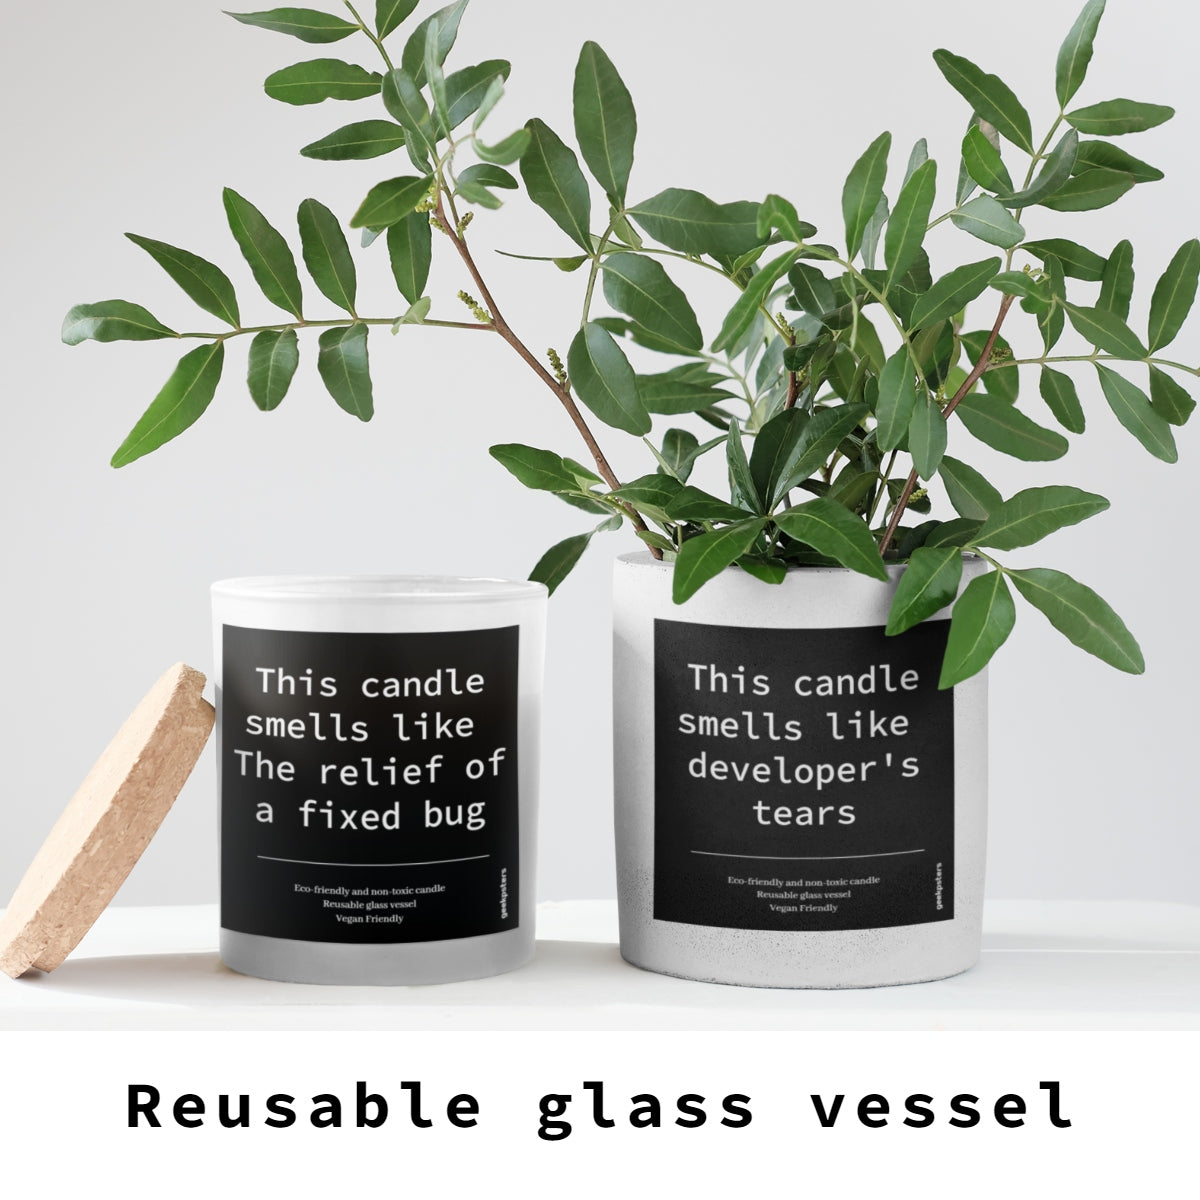 Two This Candle Deployed - No Rollbacks Scented Soy Candles in white and black glass jars with humorous text related to coding, next to a green plant and a piece of wood.